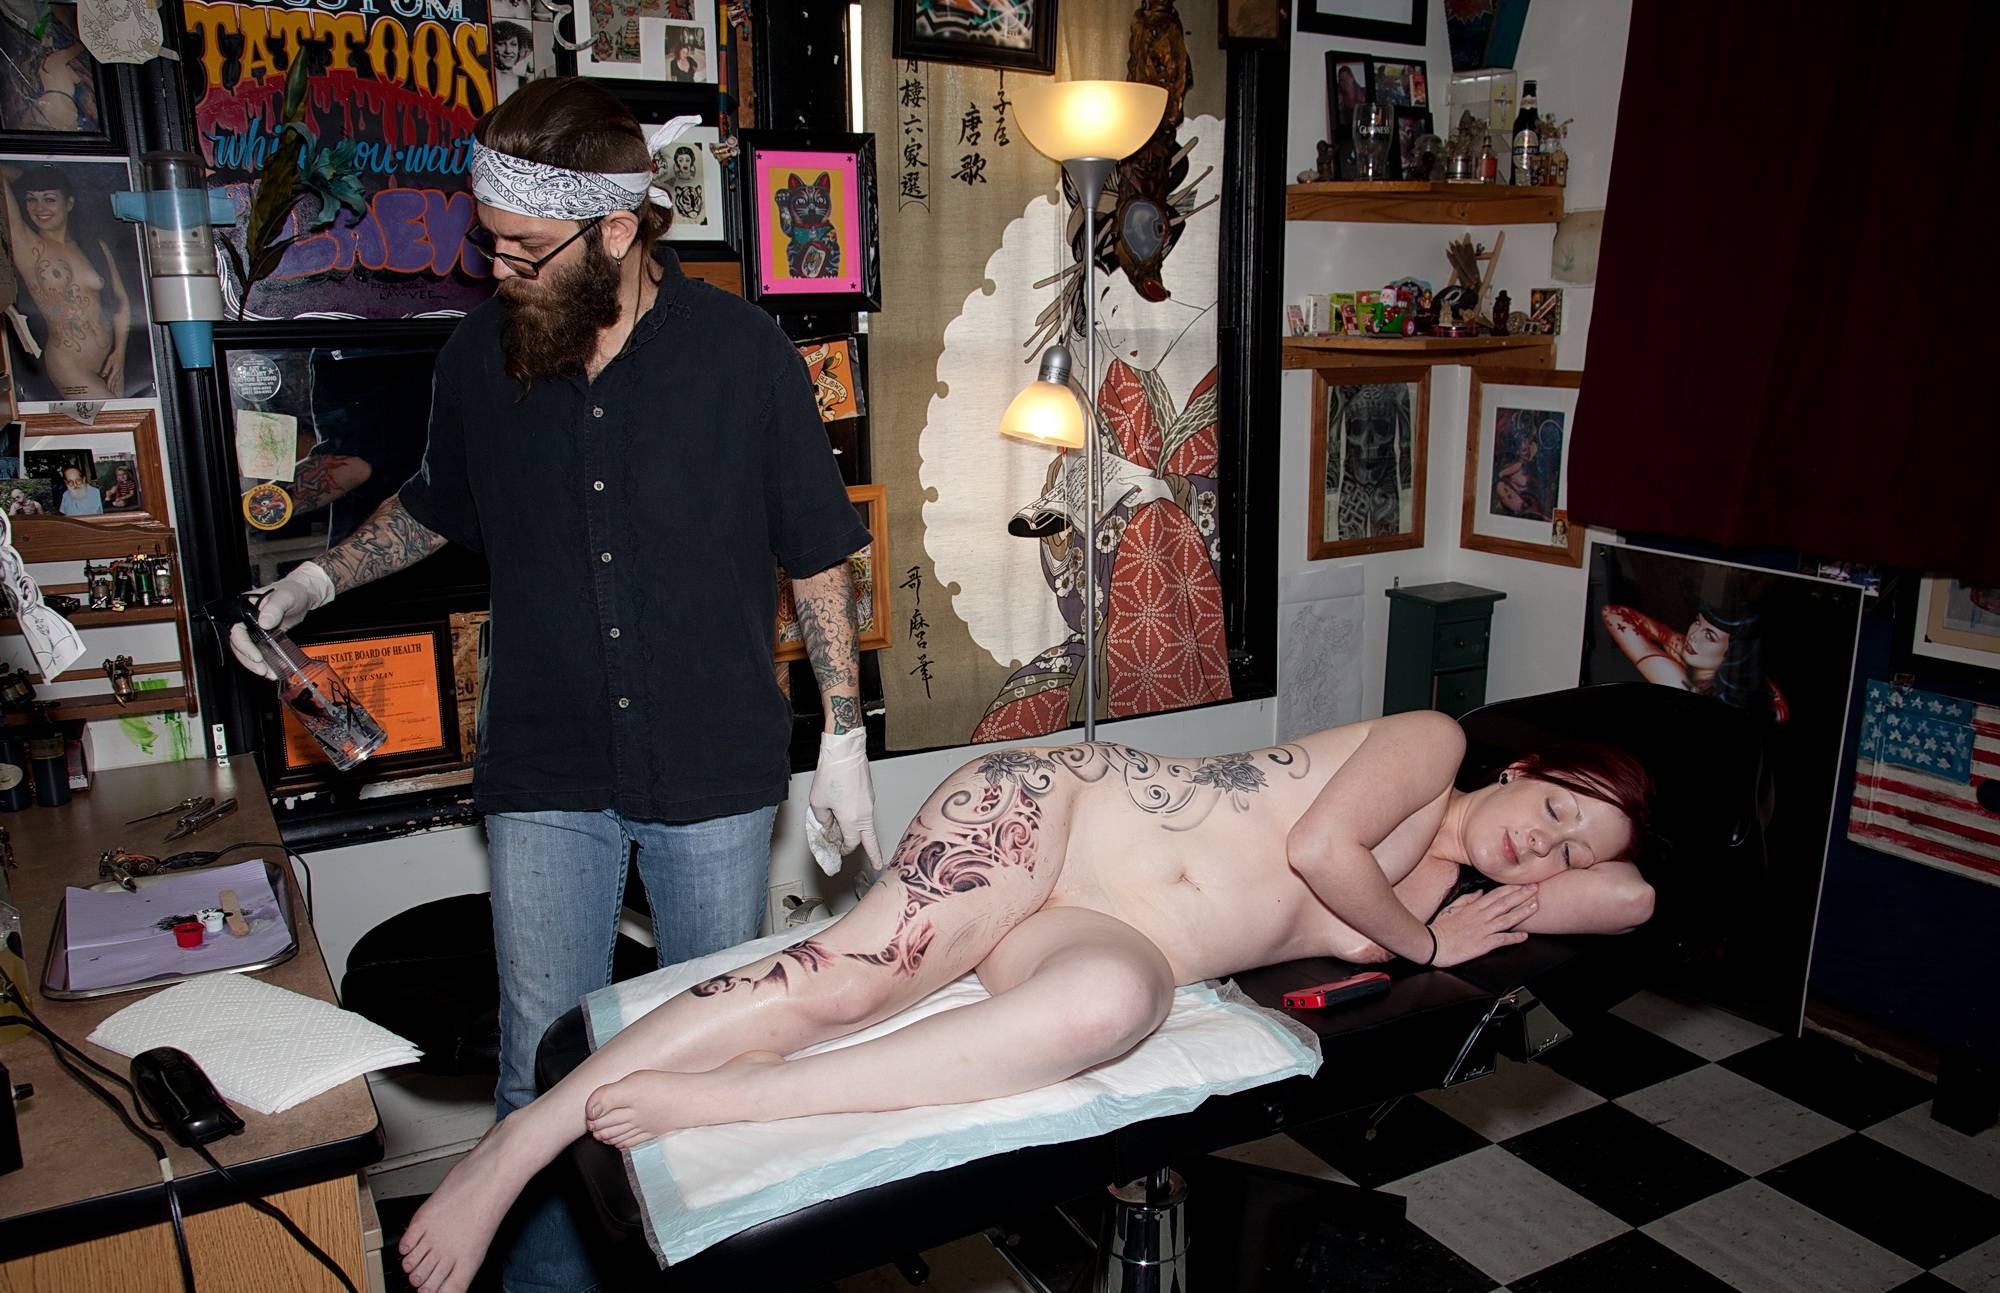 Pure Nudism Photos-Isabella Getting A Tattoo - 1